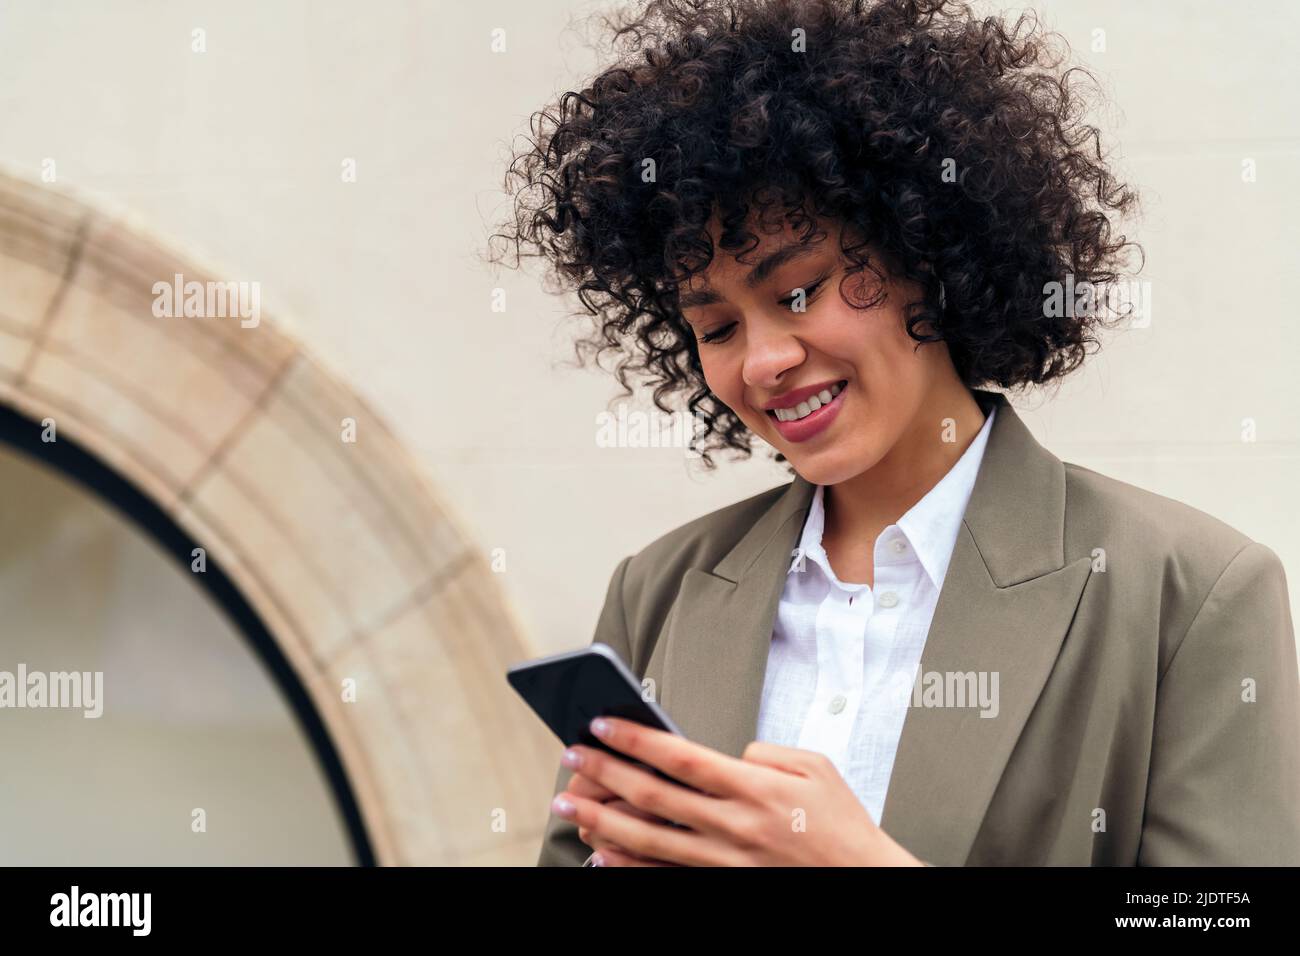 portrait of a young woman with curly hair smiling happy typing a message with her mobile phone, concept of youth and technology, copy space for text Stock Photo